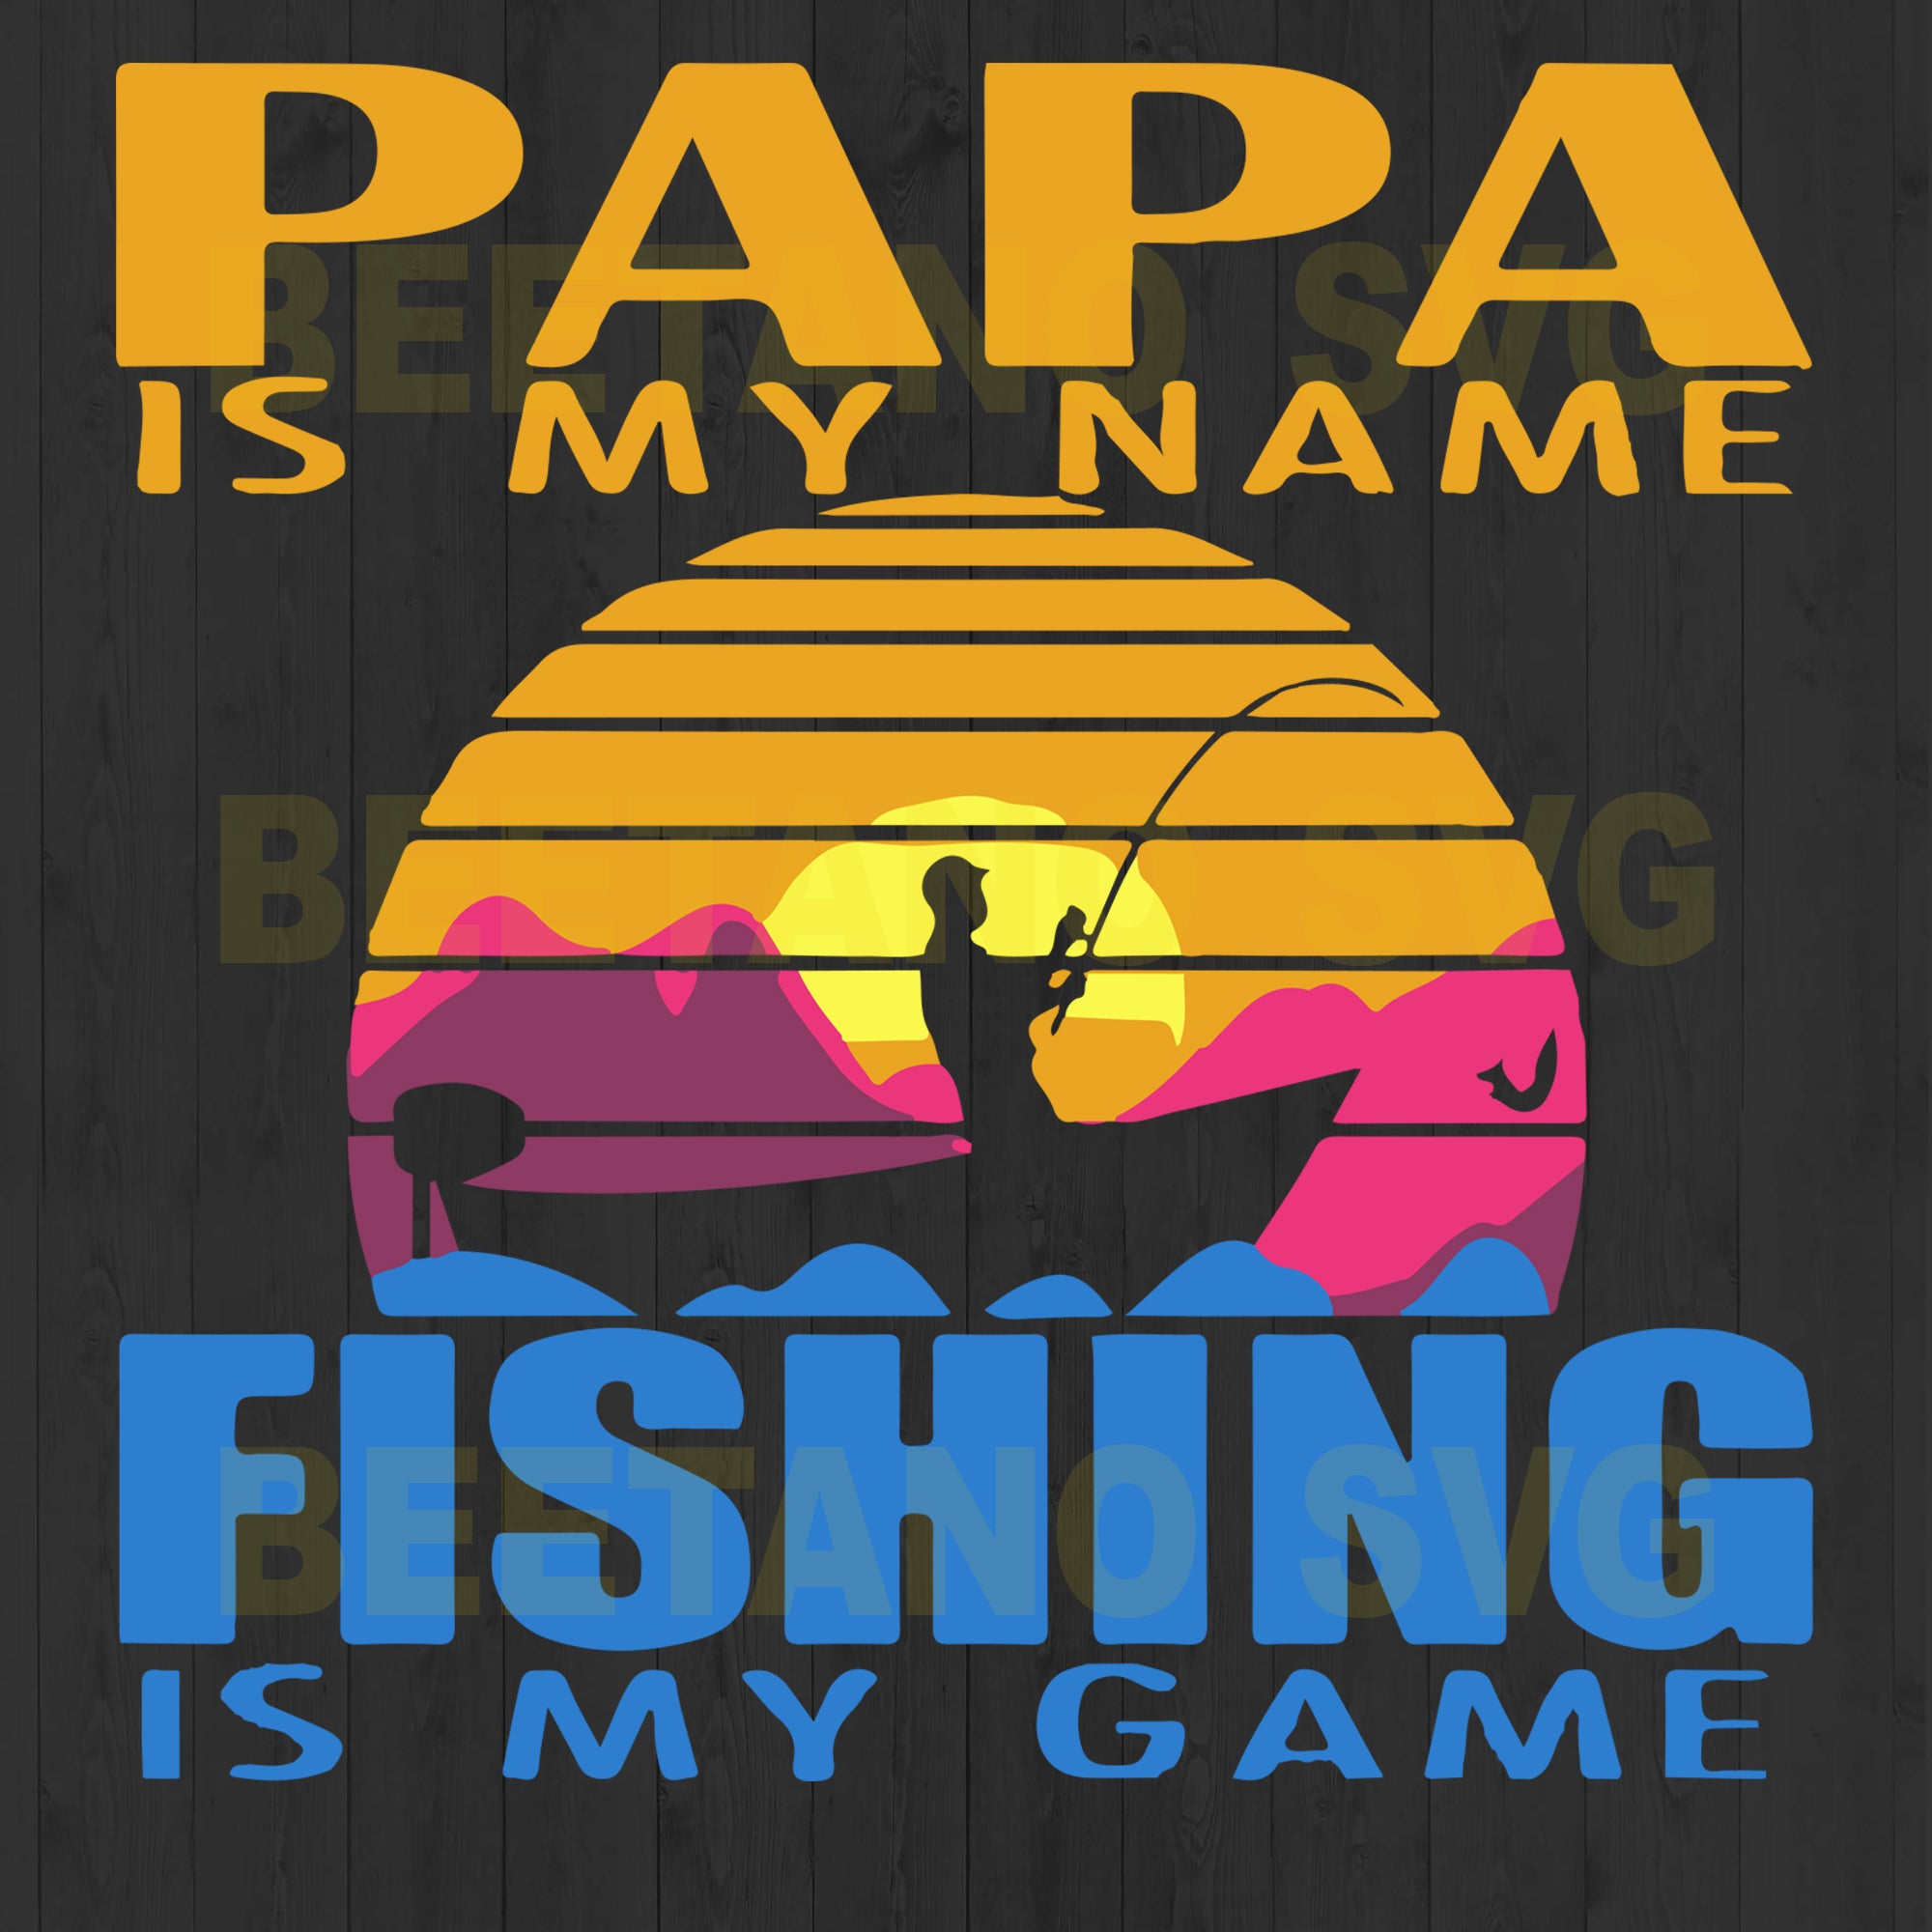 Download Papa Is My Name Fishing Is My Game Svg Files Papa Fishing Svg Fishin Beetanosvg Scalable Vector Graphics